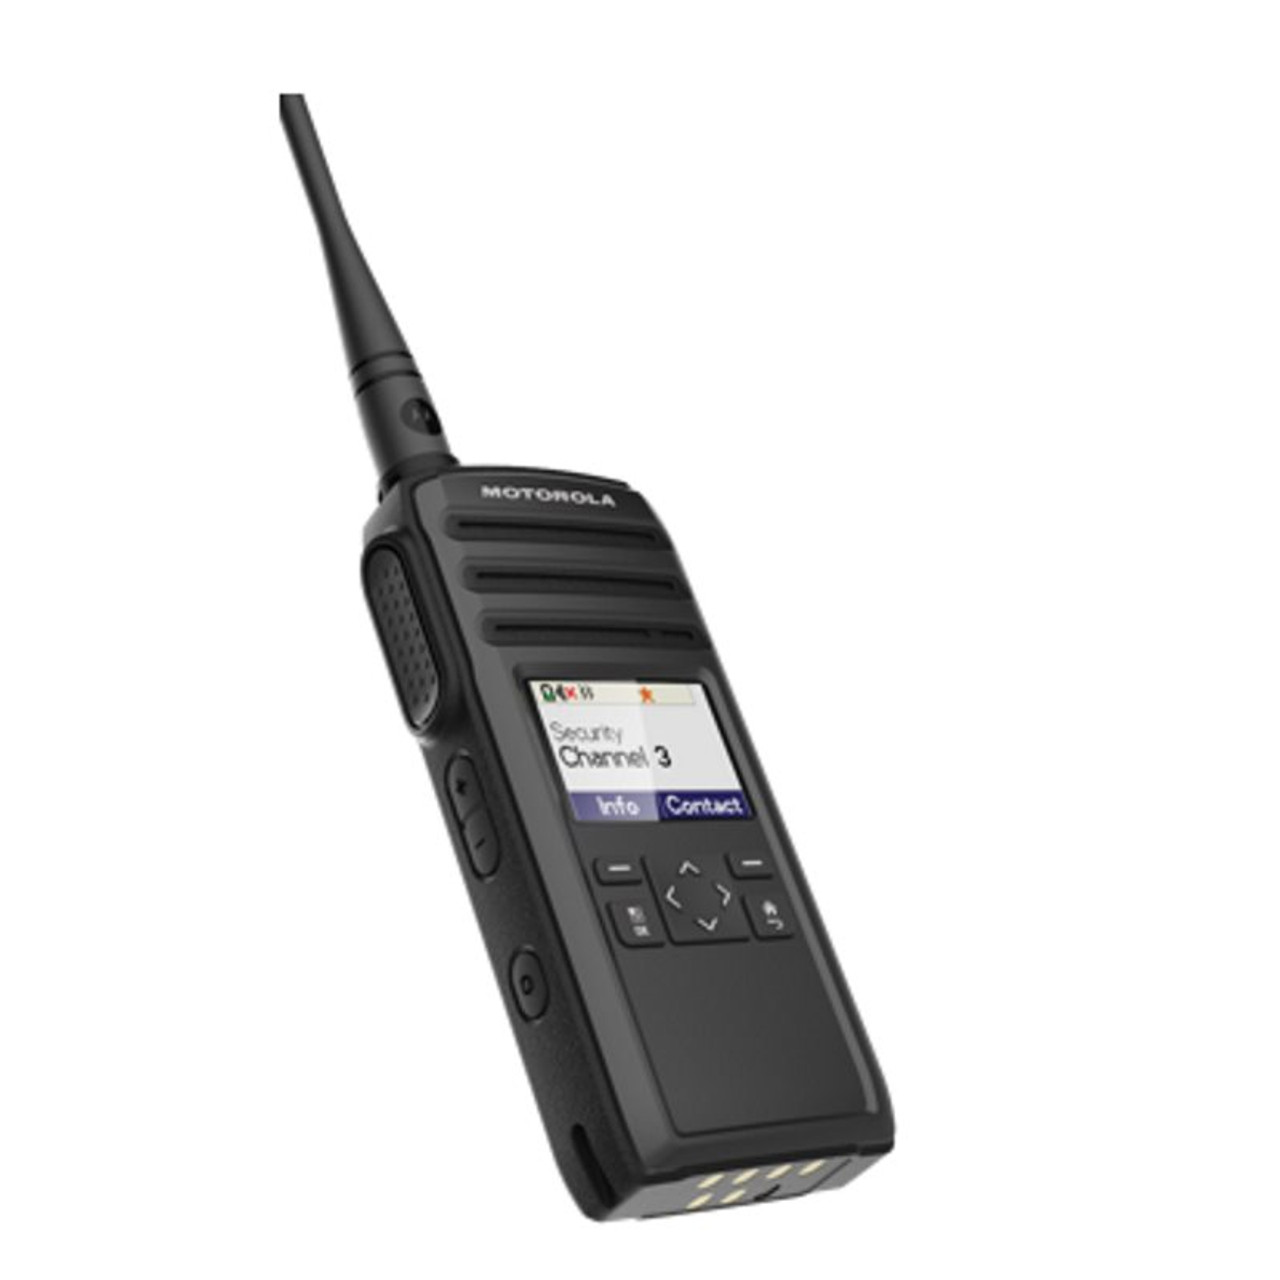 Get your Six Pack of LICENSE FREE Motorola DTR700 Digital Two Way Radios  for business with Vibra Call. Backwards compatible for the DTR410, 550 and  650 models.